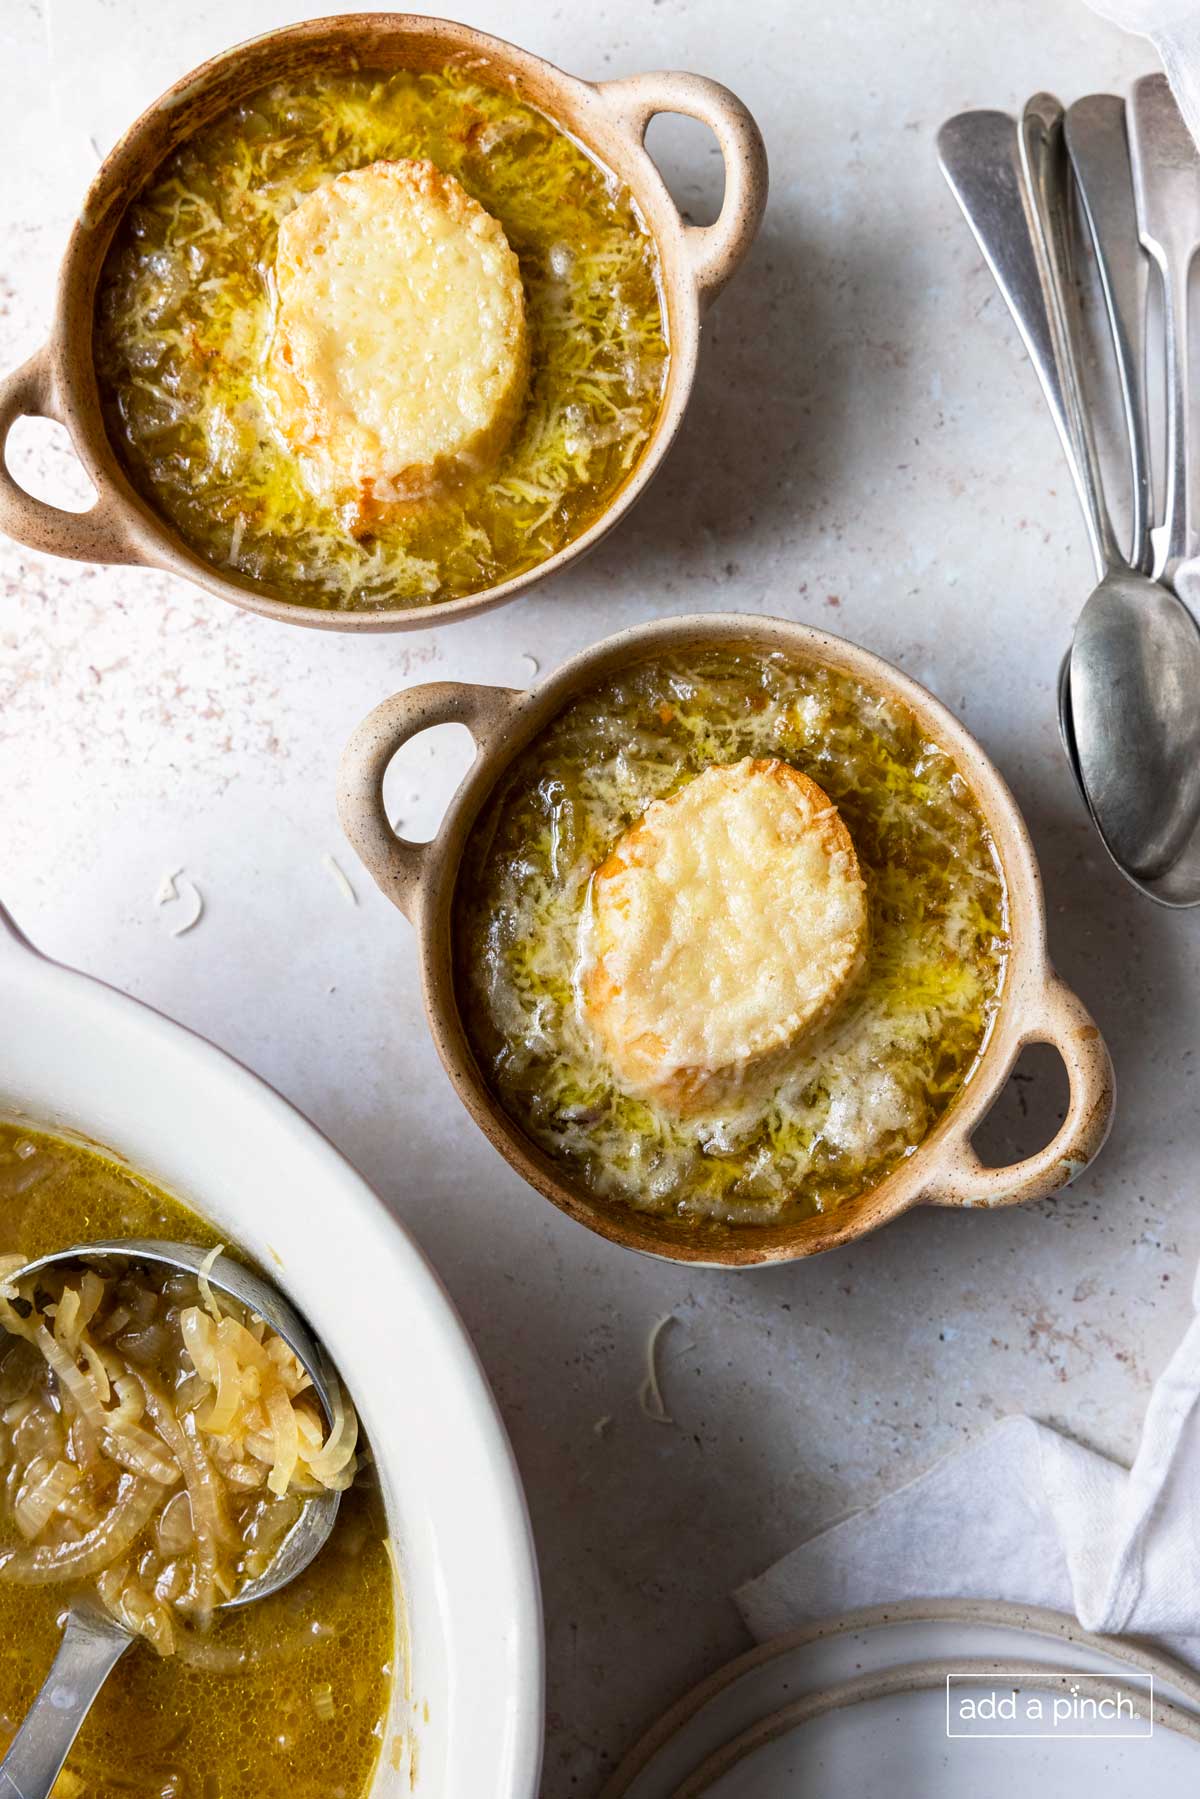 Soup crocks hold french onion soup that has slice of crusty bread topped with melted cheeses.